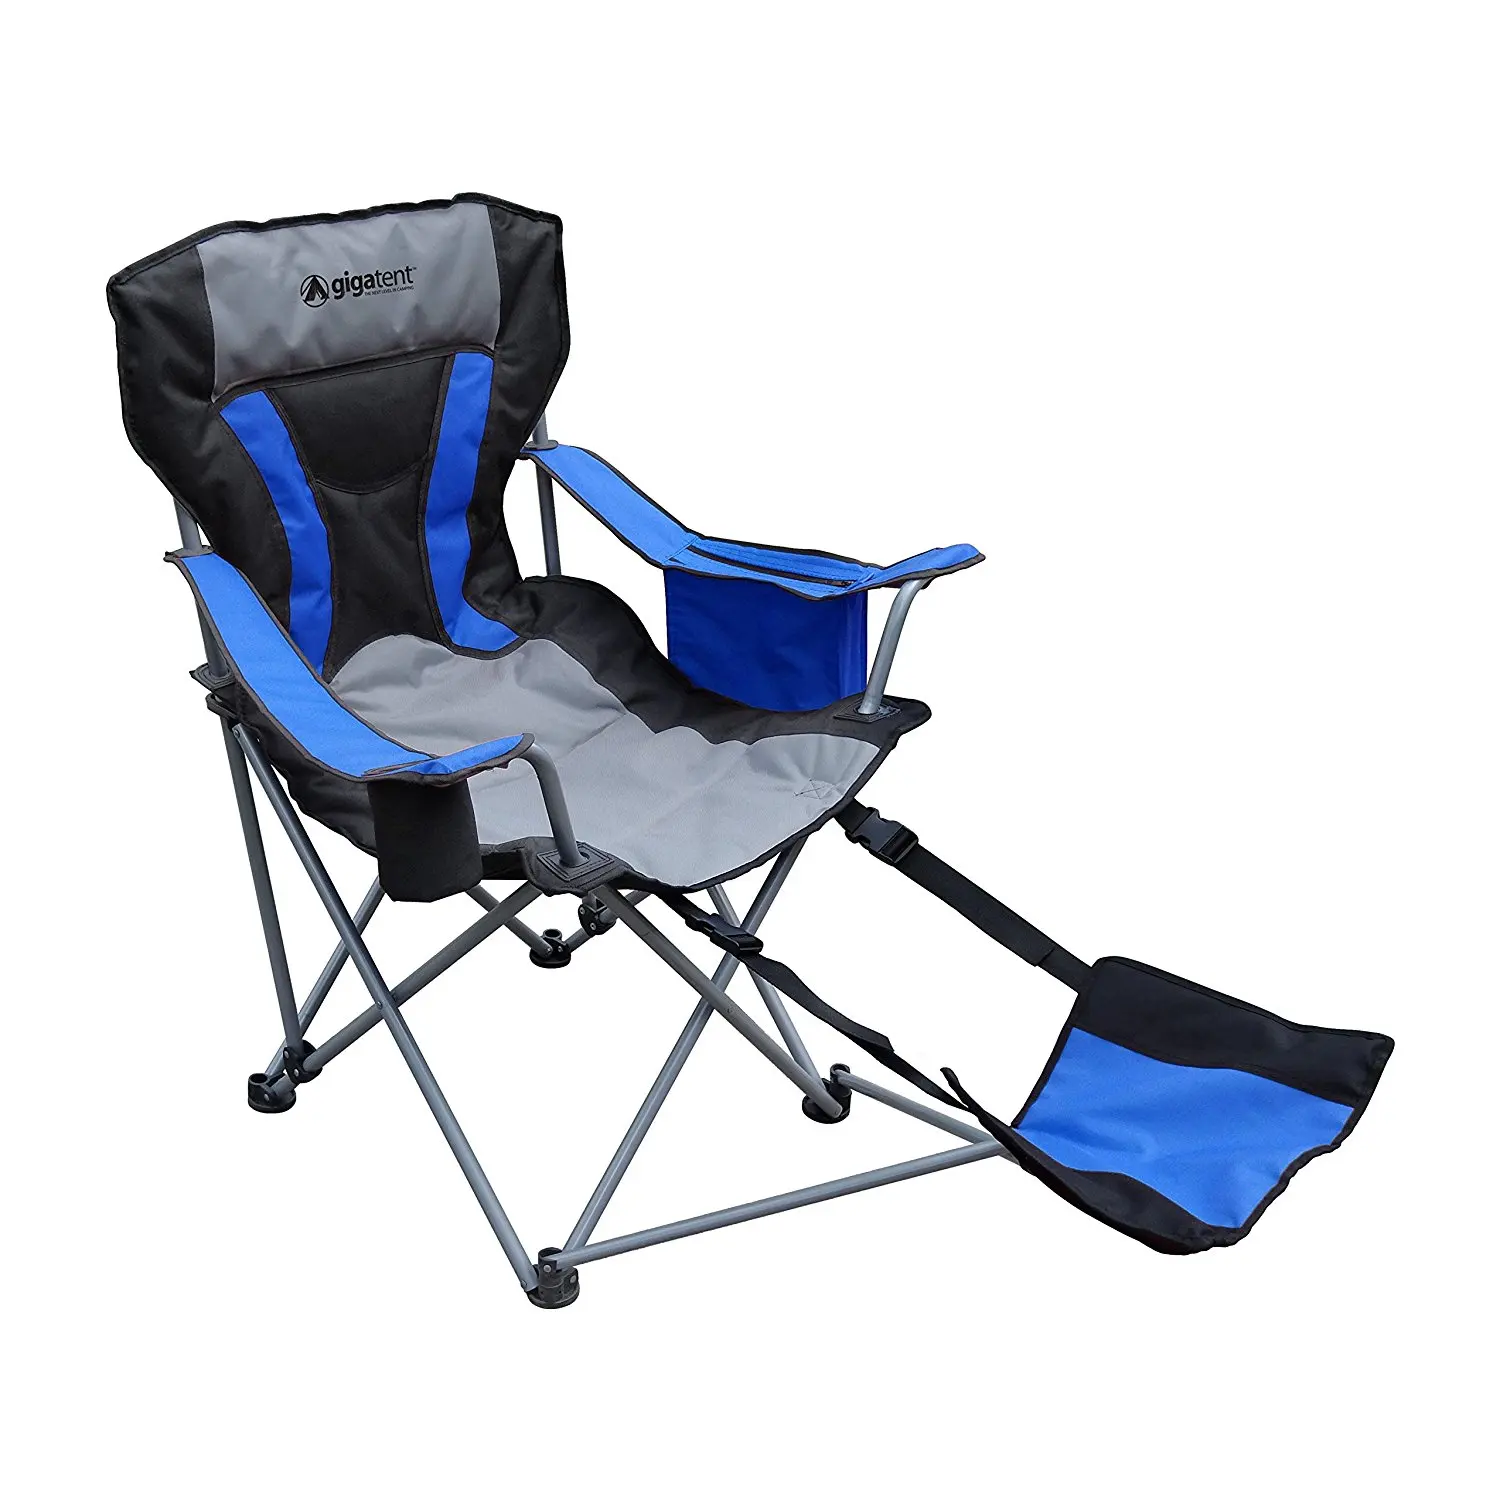 Buy Gigatent Camping Chair with Footrest in Cheap Price on